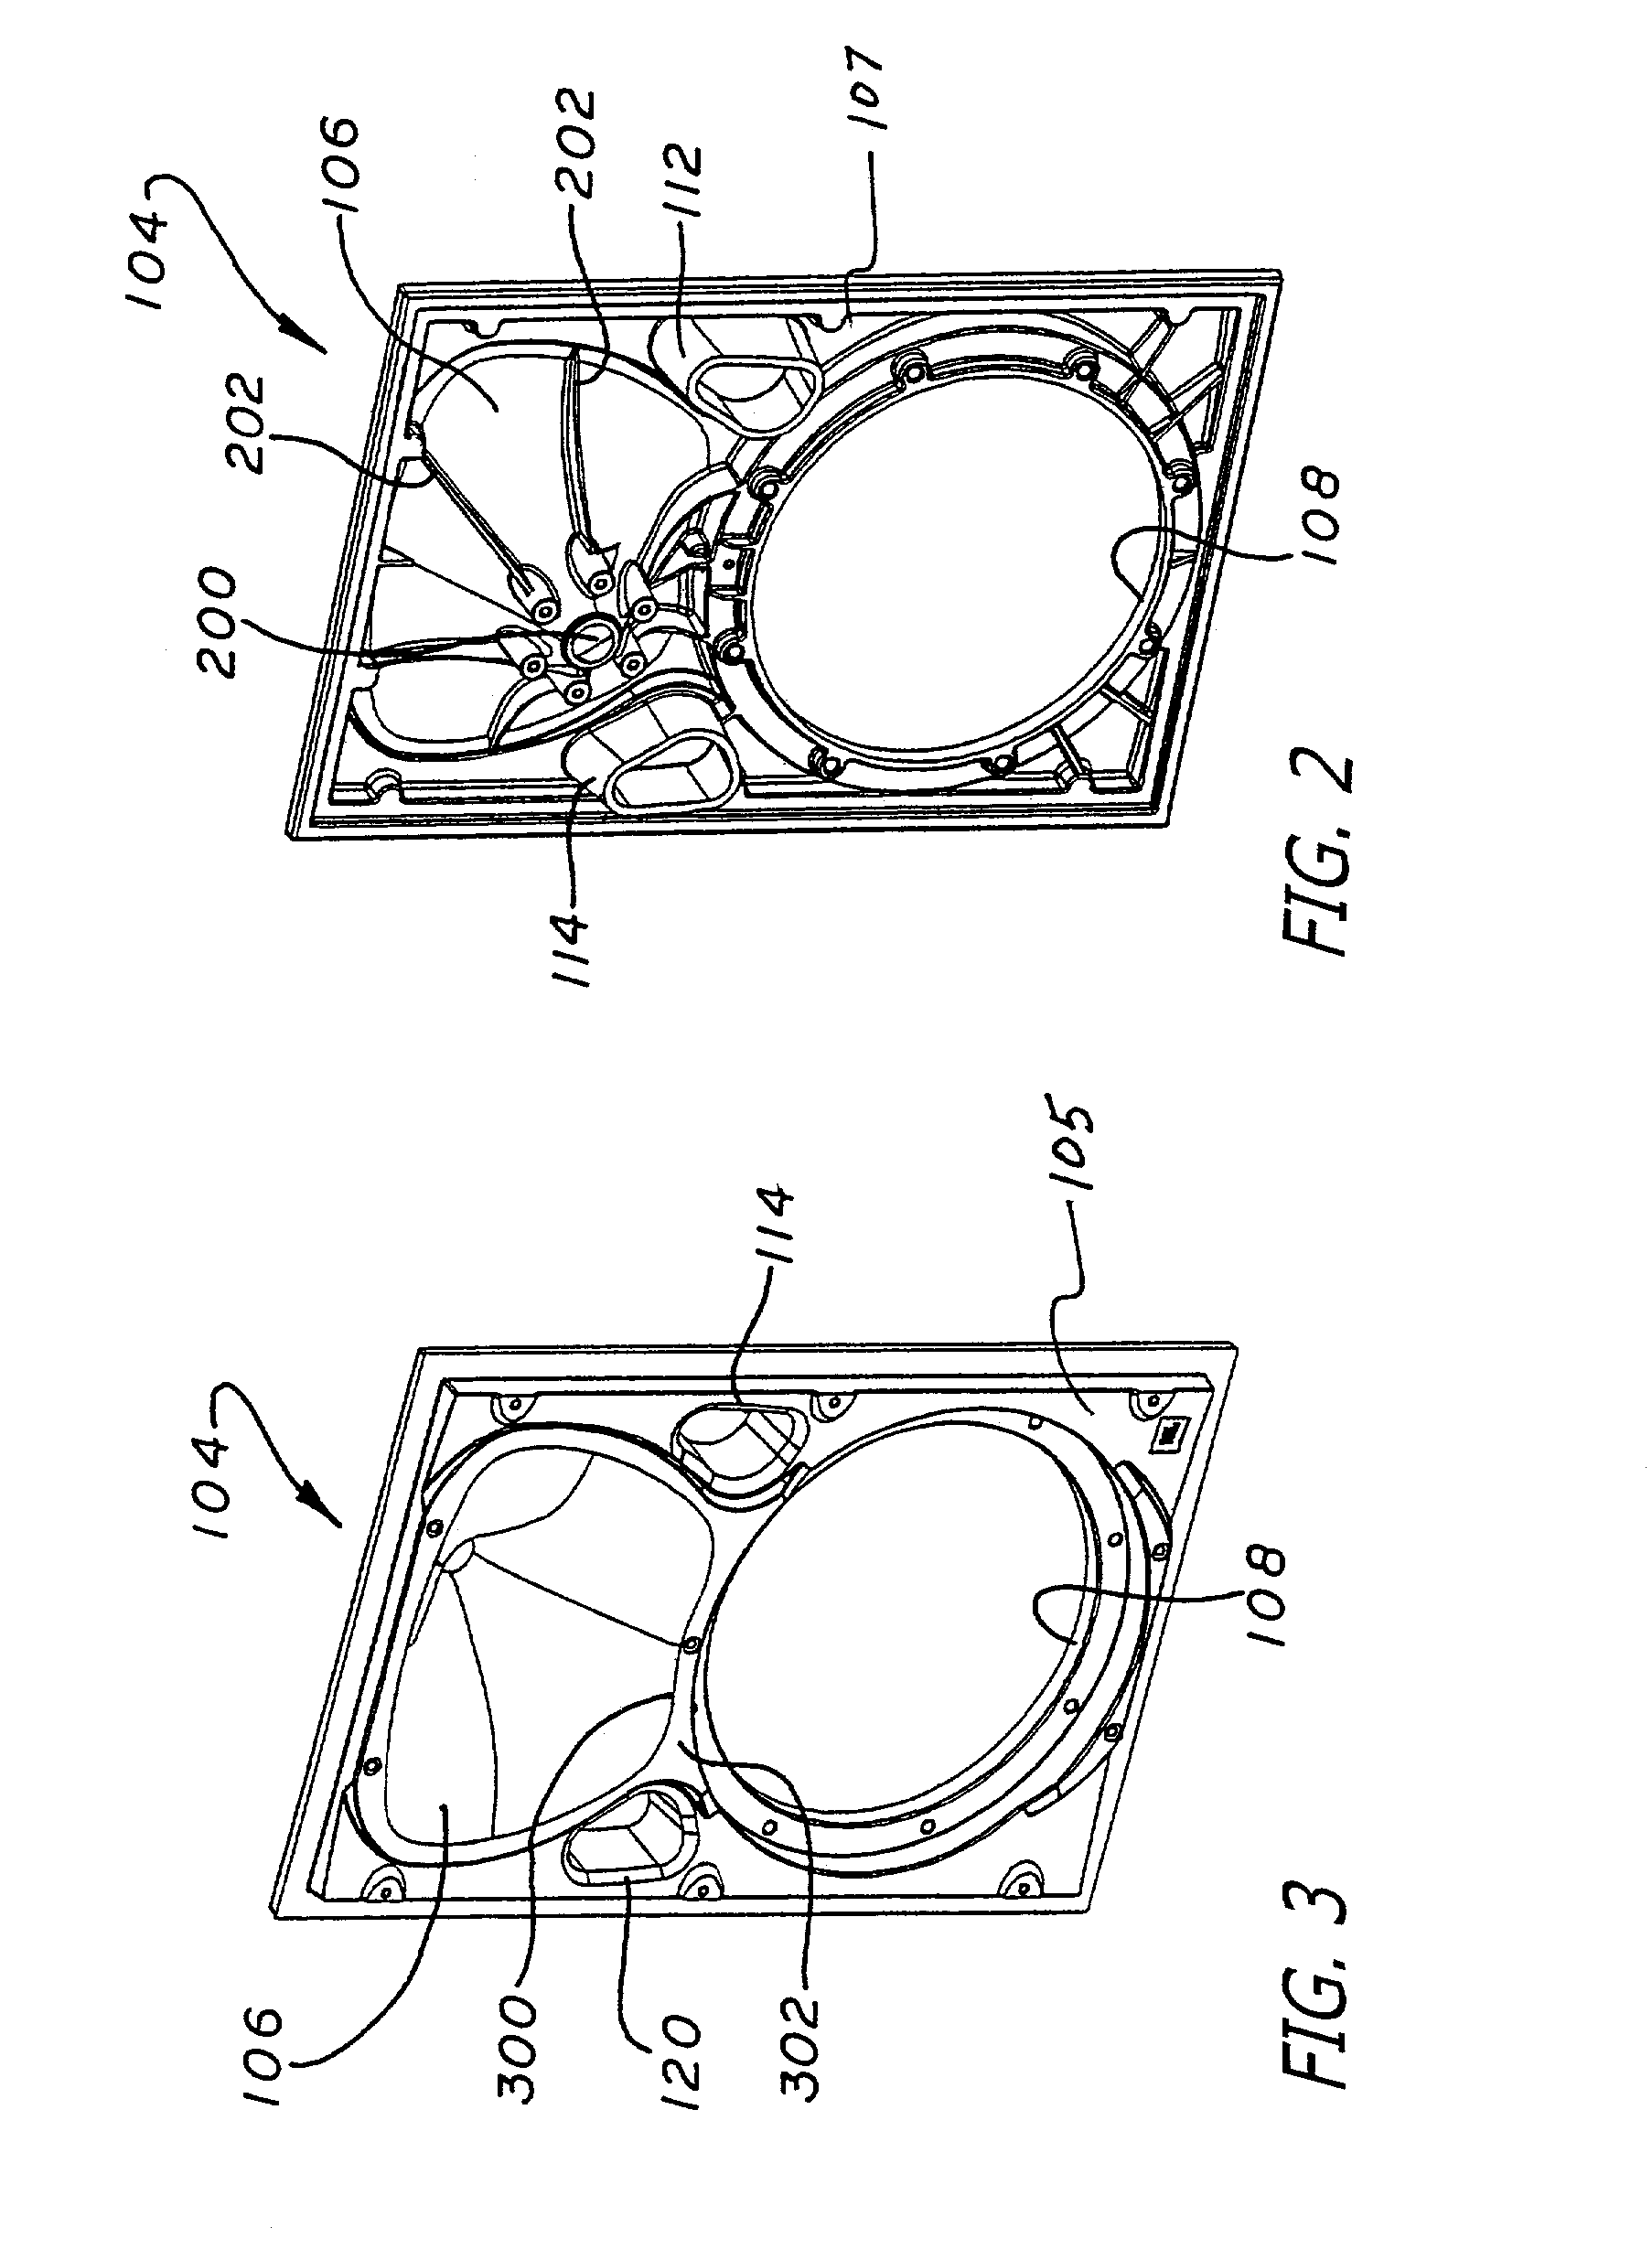 Thermoset composite material baffle for loudspeaker